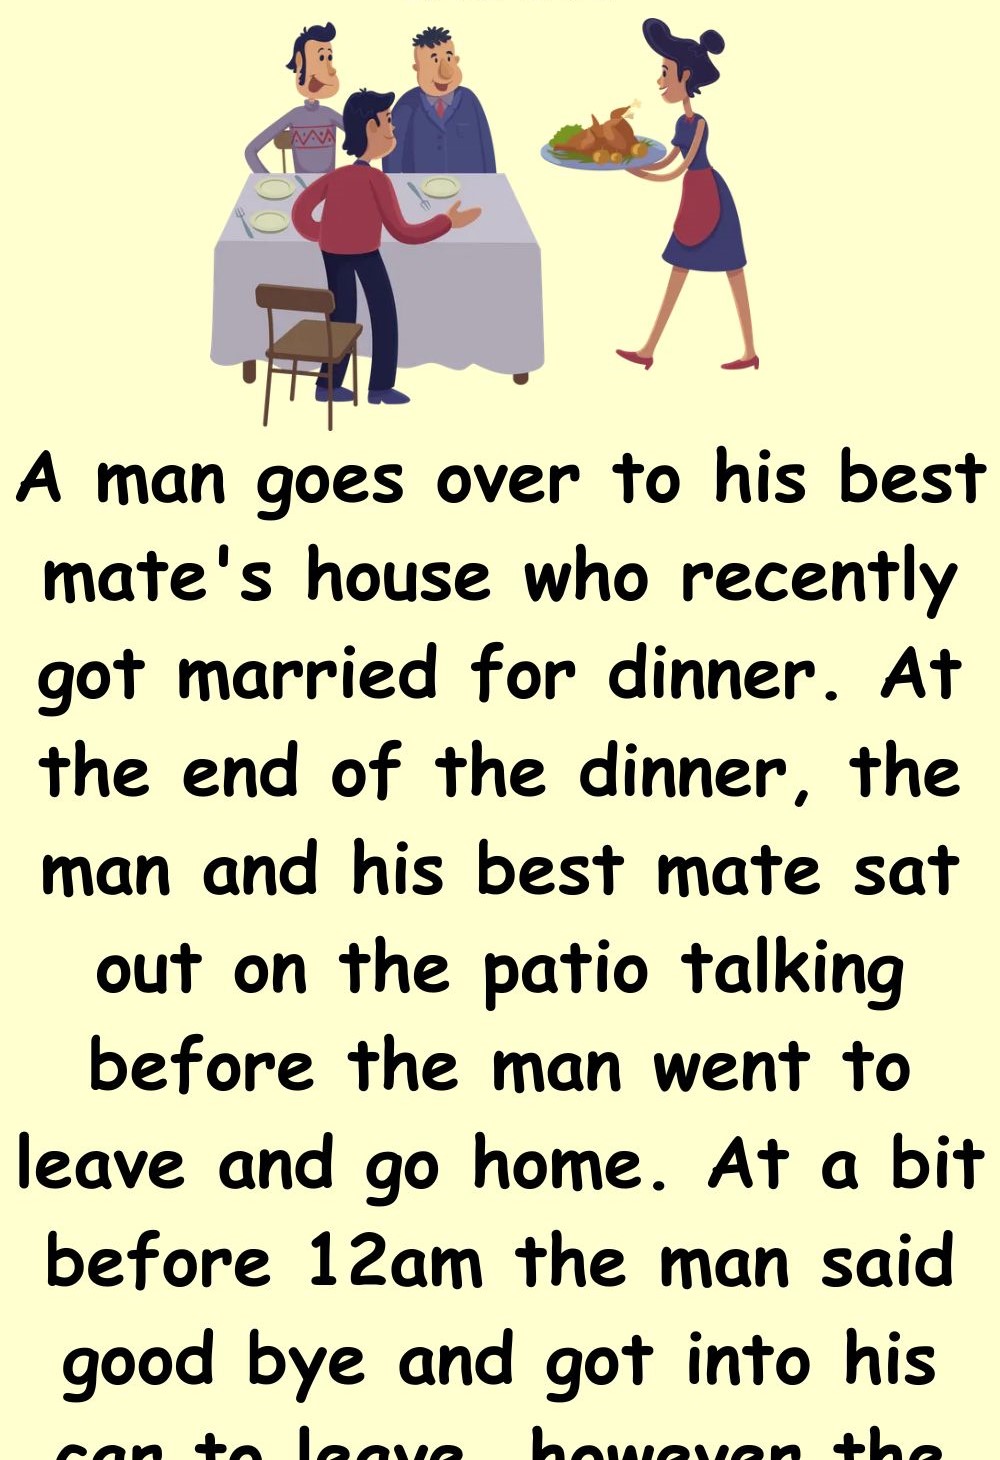 A man goes over to his best mate's house